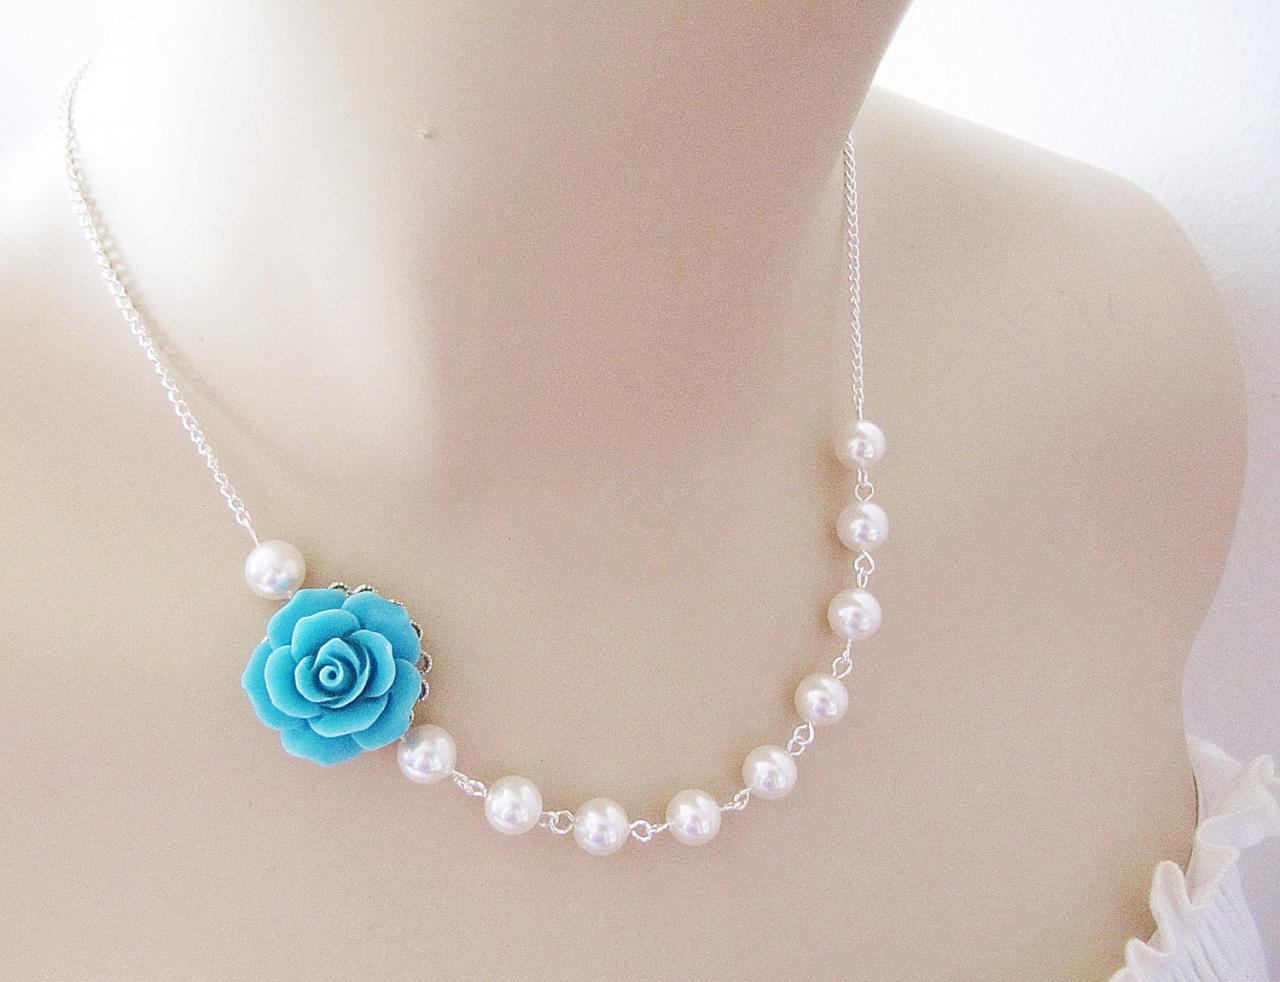 Light Turquoise Blue Rose Flower Cabochon And Crystal White Swarovski Pearls Bridal Necklace